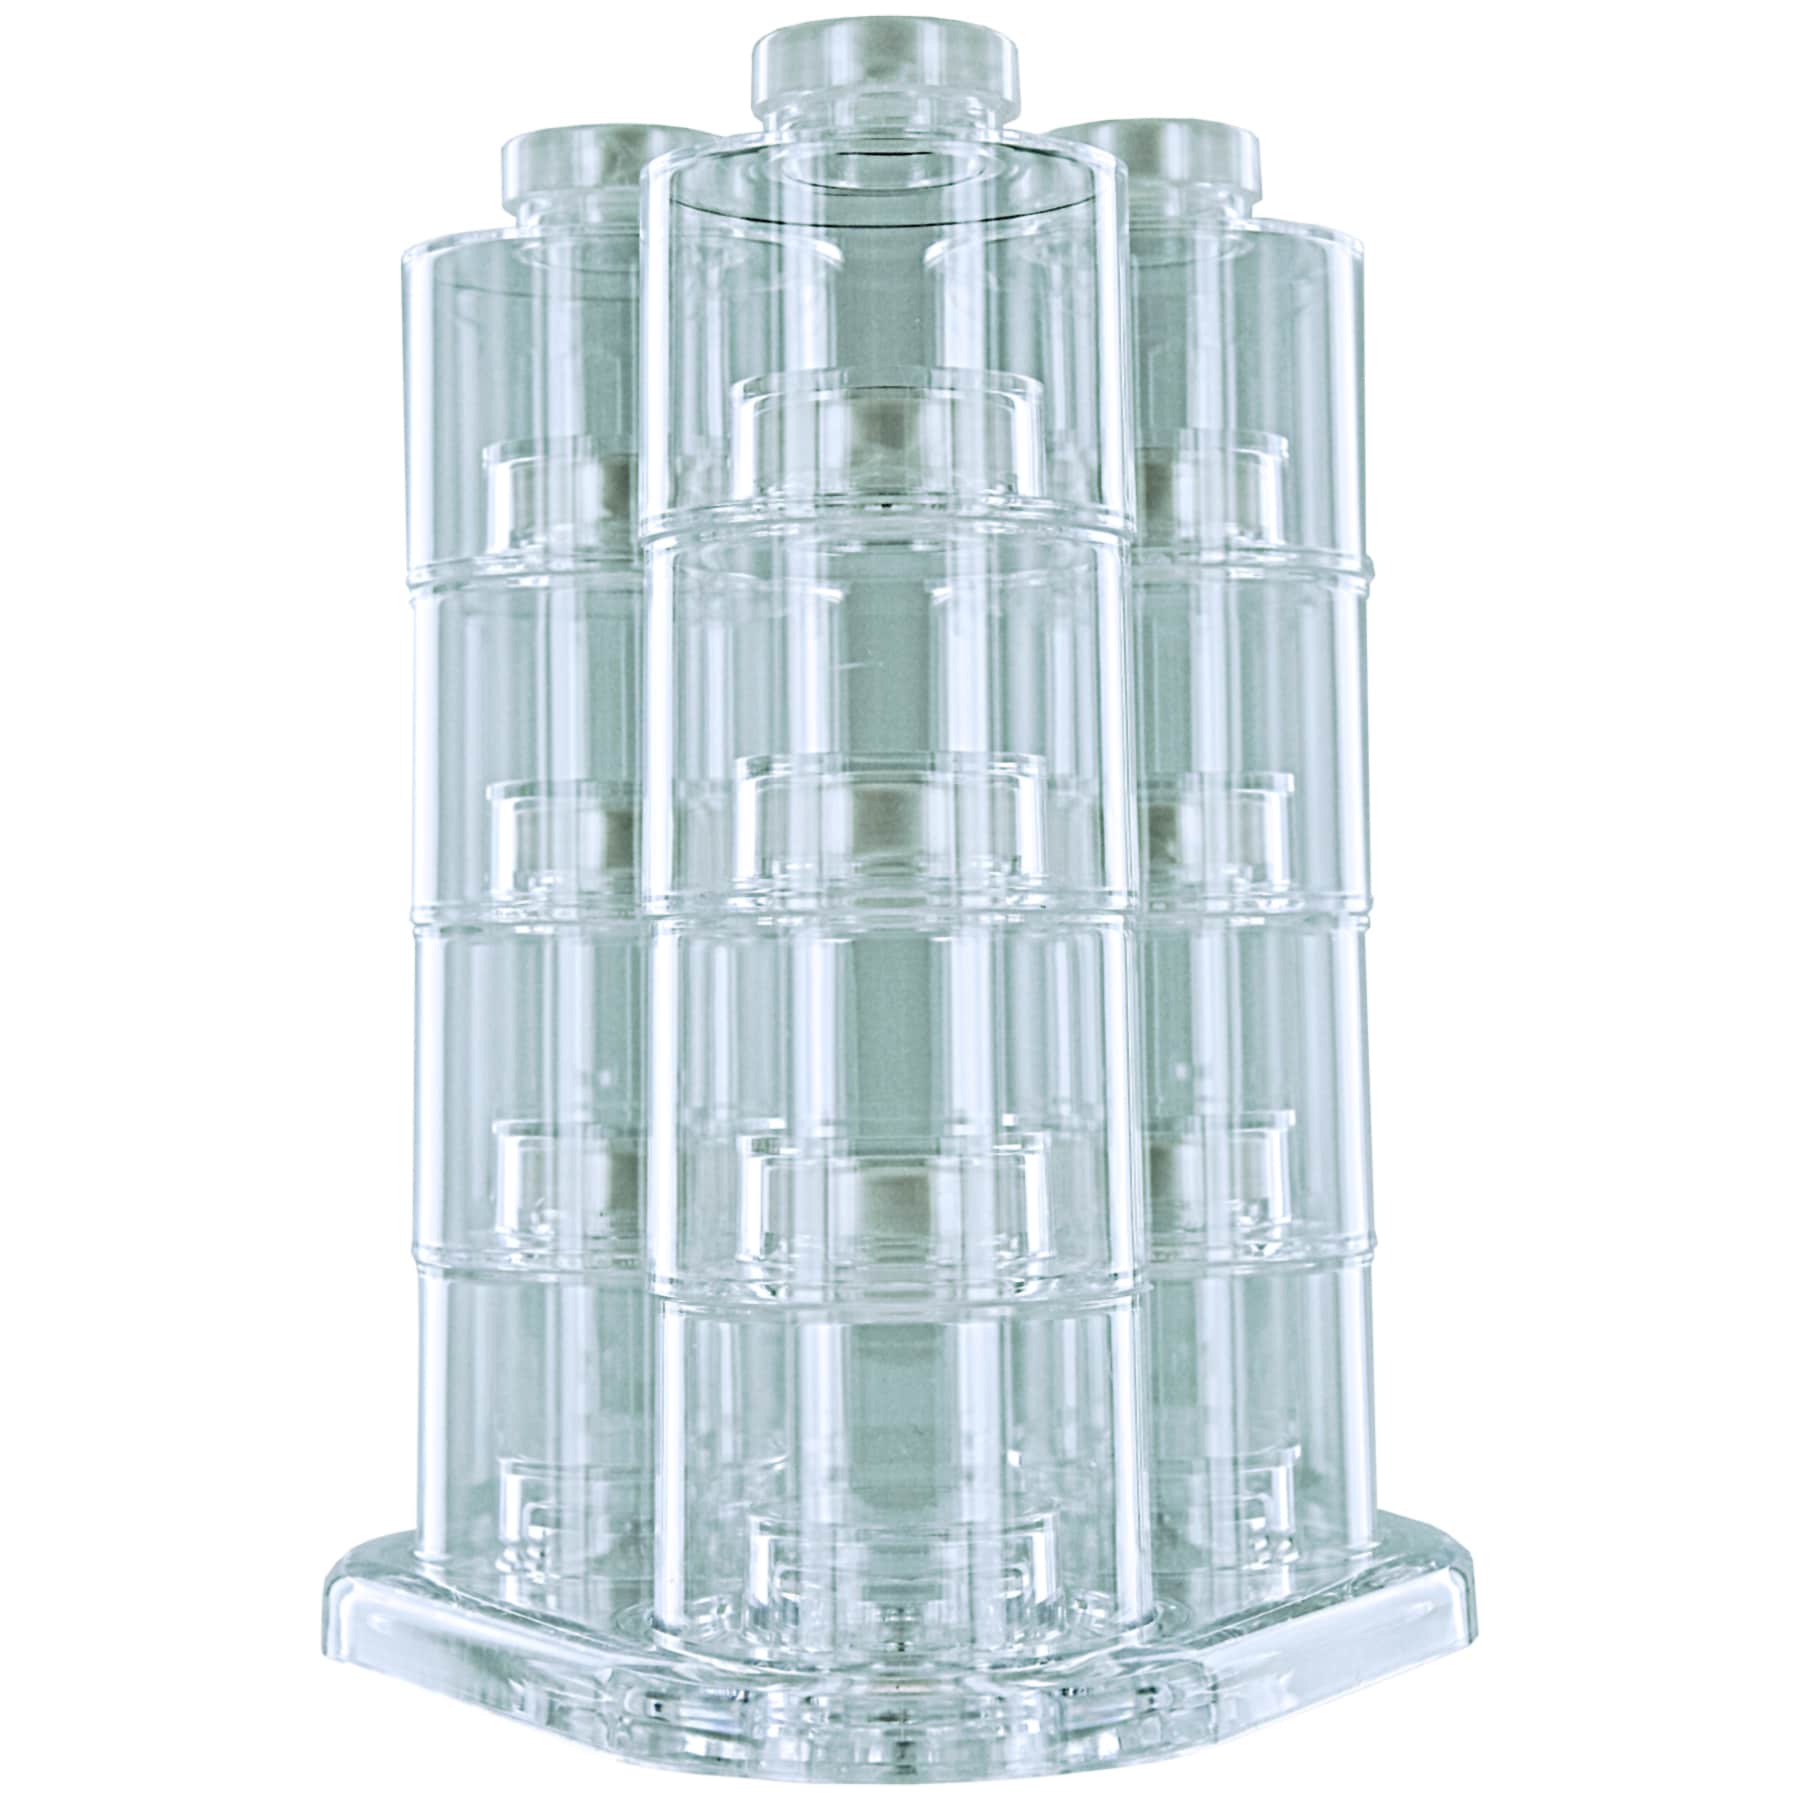 SPICE TOWER, Self Stacking Spice Bottles, Set of 6 - Prodyne